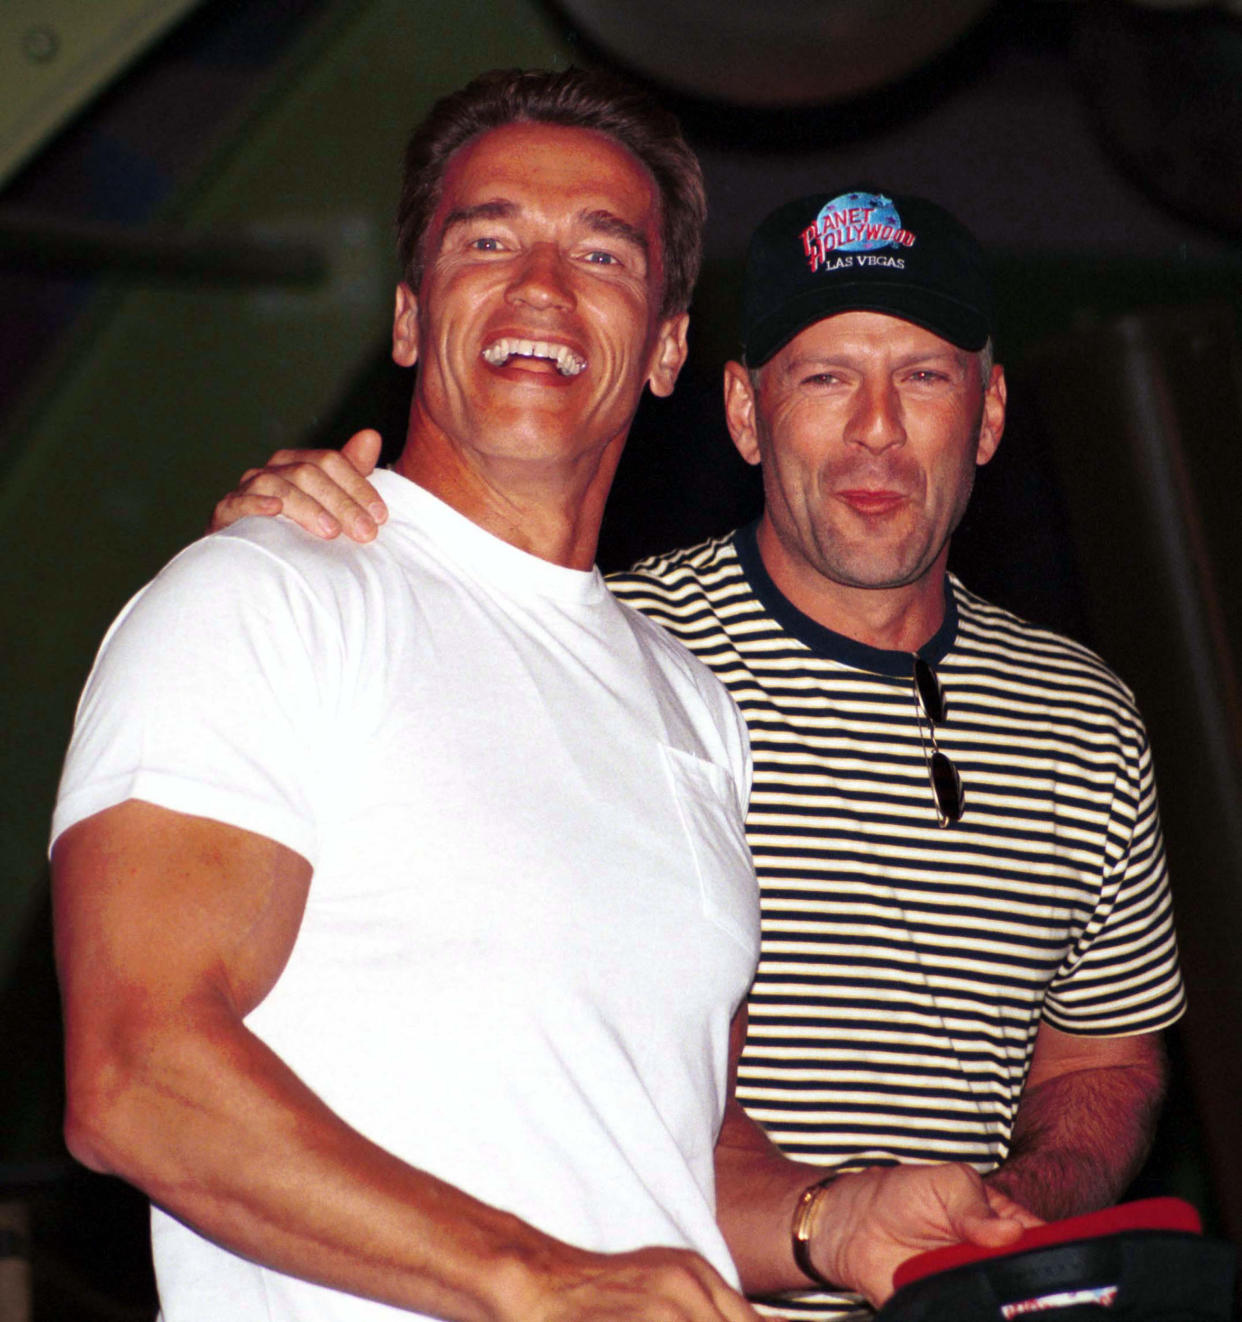 Arnold Schwarzenegger and Bruce Willis at the opening of Planet Hollywood July 25, 1994 in Las Vegas, Nevada. (Scott Harrison / Getty Images)